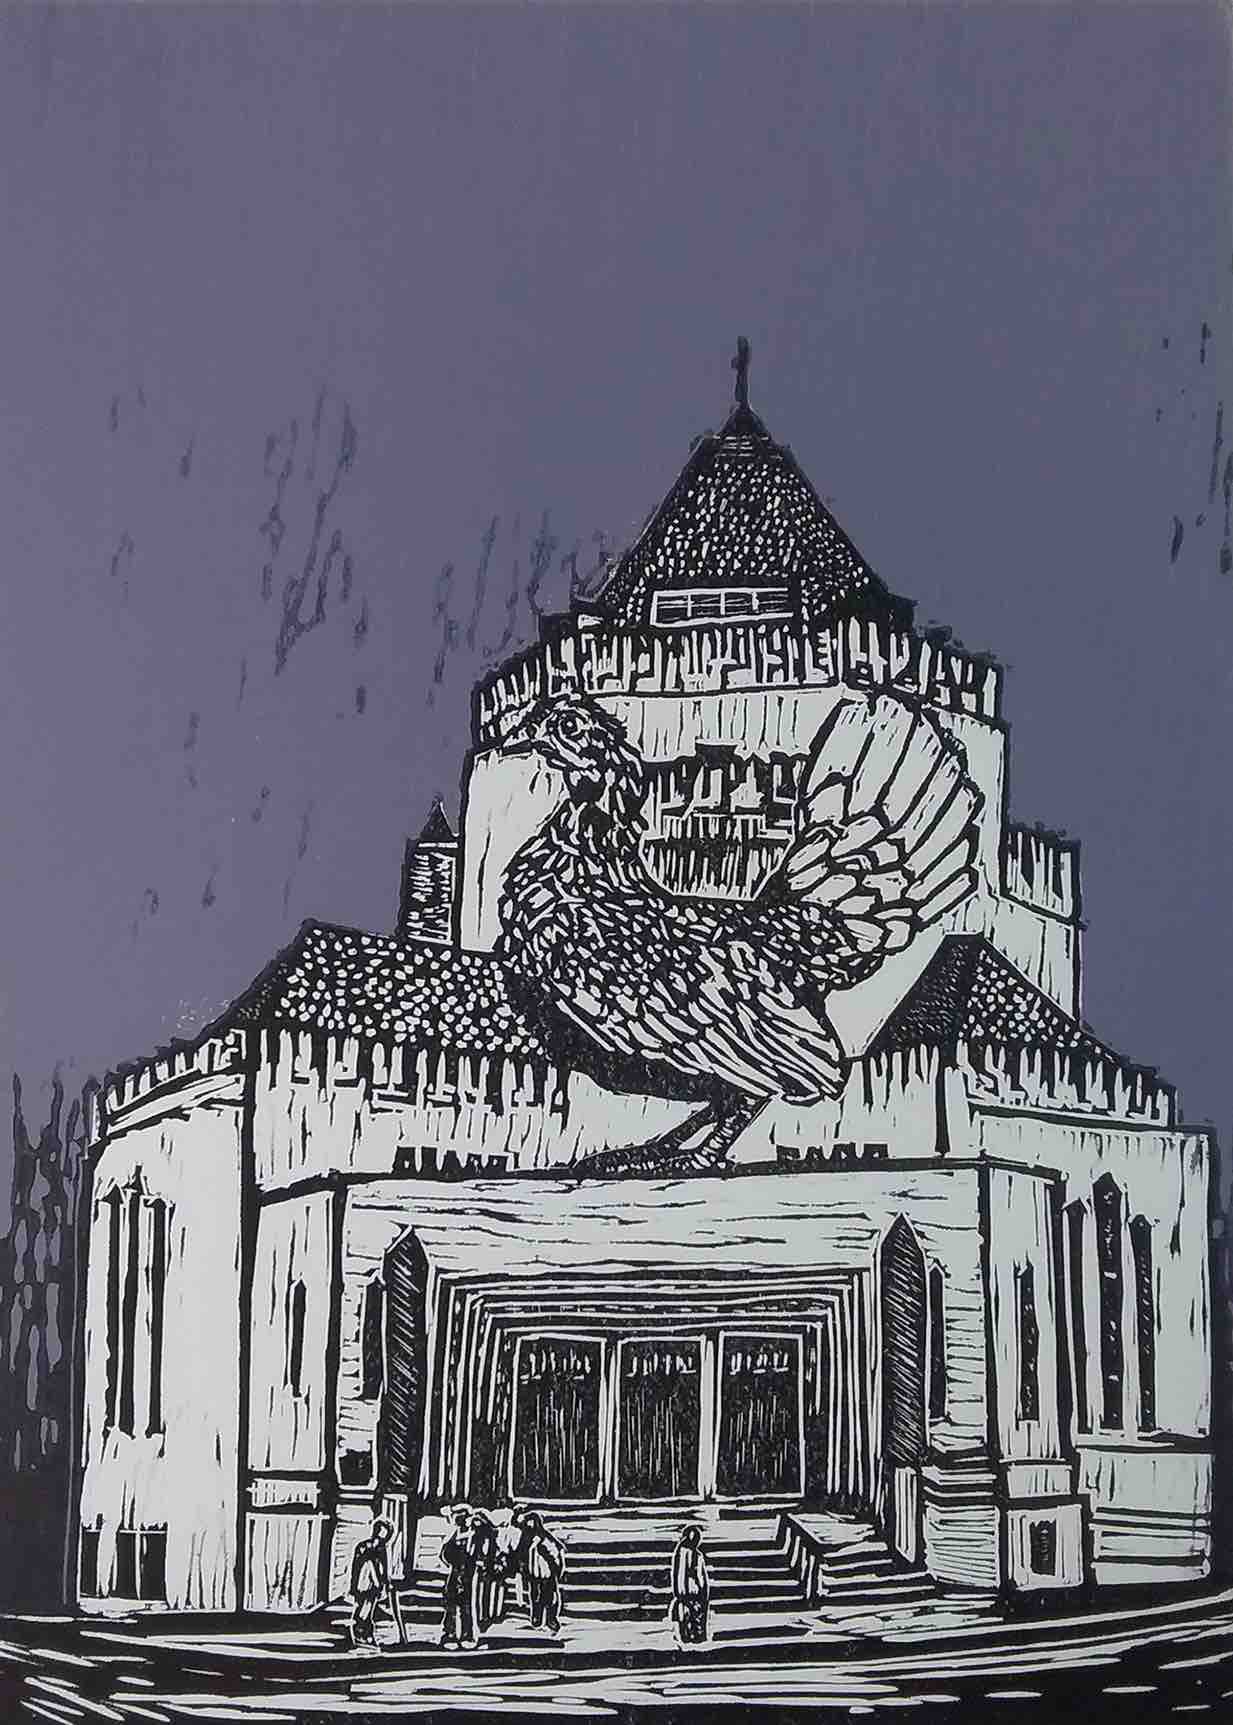 Perched jauntily atop the entryway of a squat church is a giant chicken, tail up and alert, 1/3 the size of the church. A small group of people mill about in front of the church doors, seemingly unperturbed. The sky is dim lilac. The bird and building are black on grey.